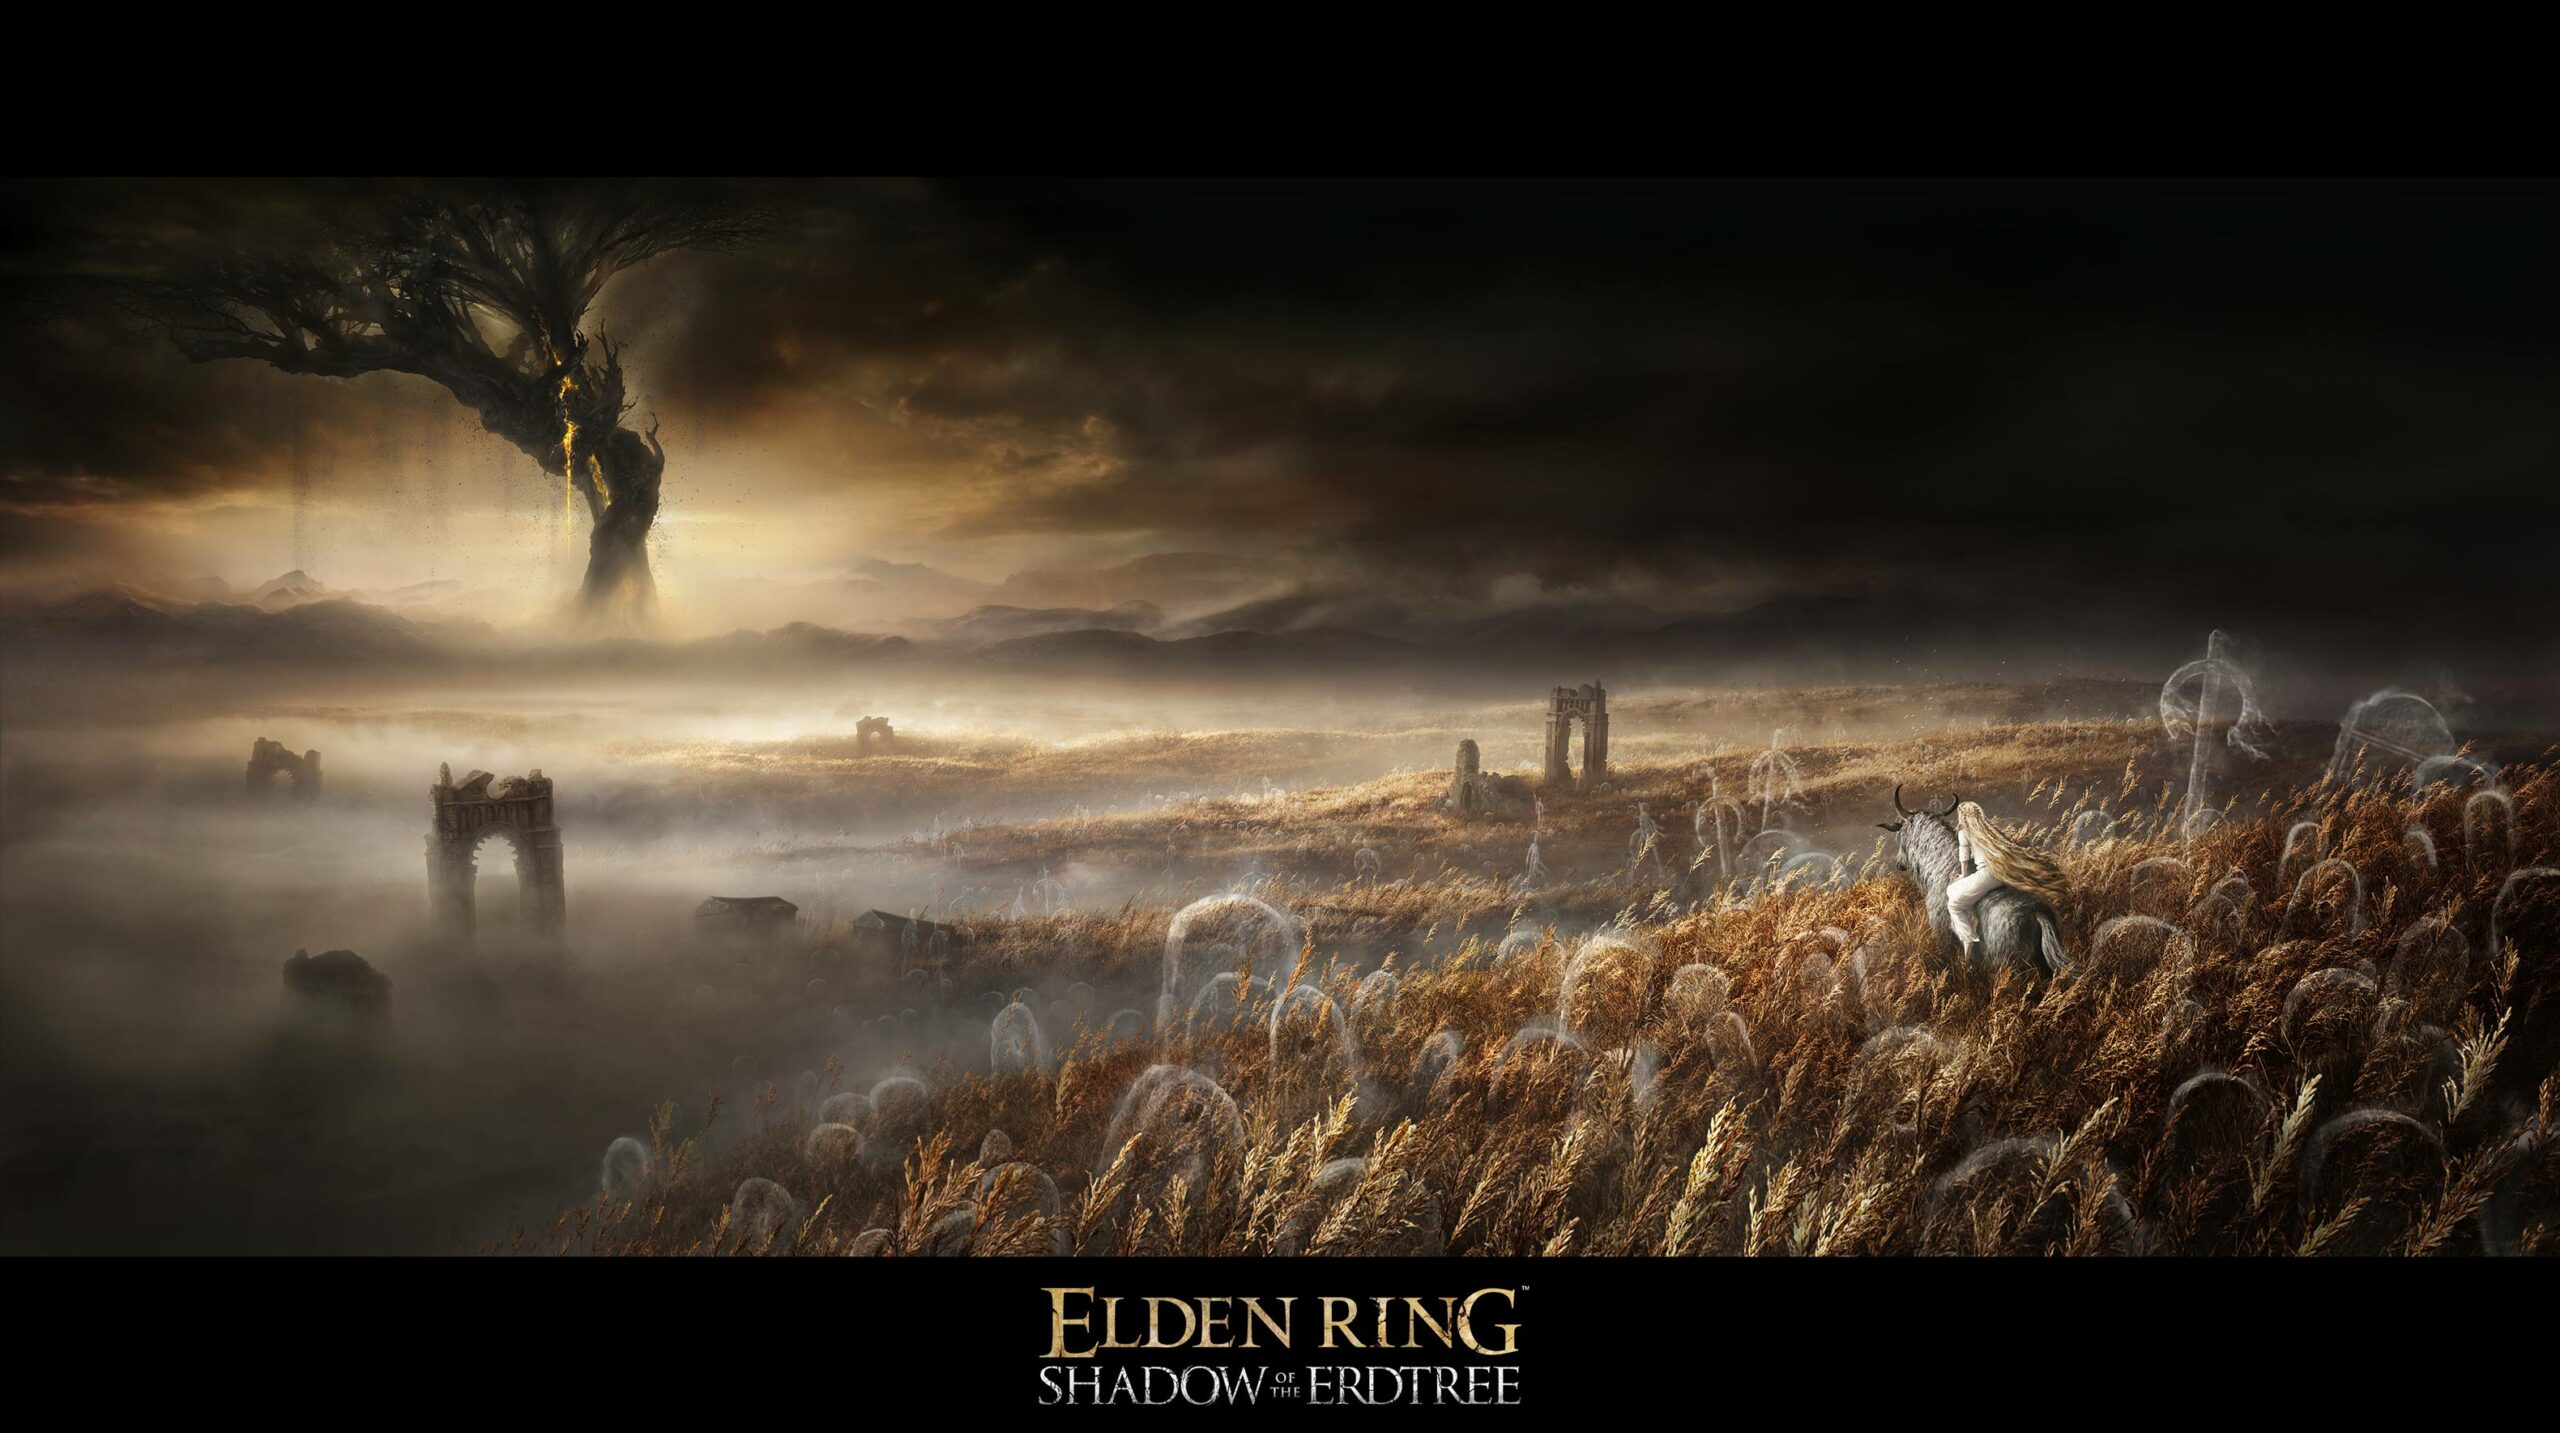 Elden Ring expansion ‘Shadow of the Erdtree’ is in development: Are you excited? thumbnail